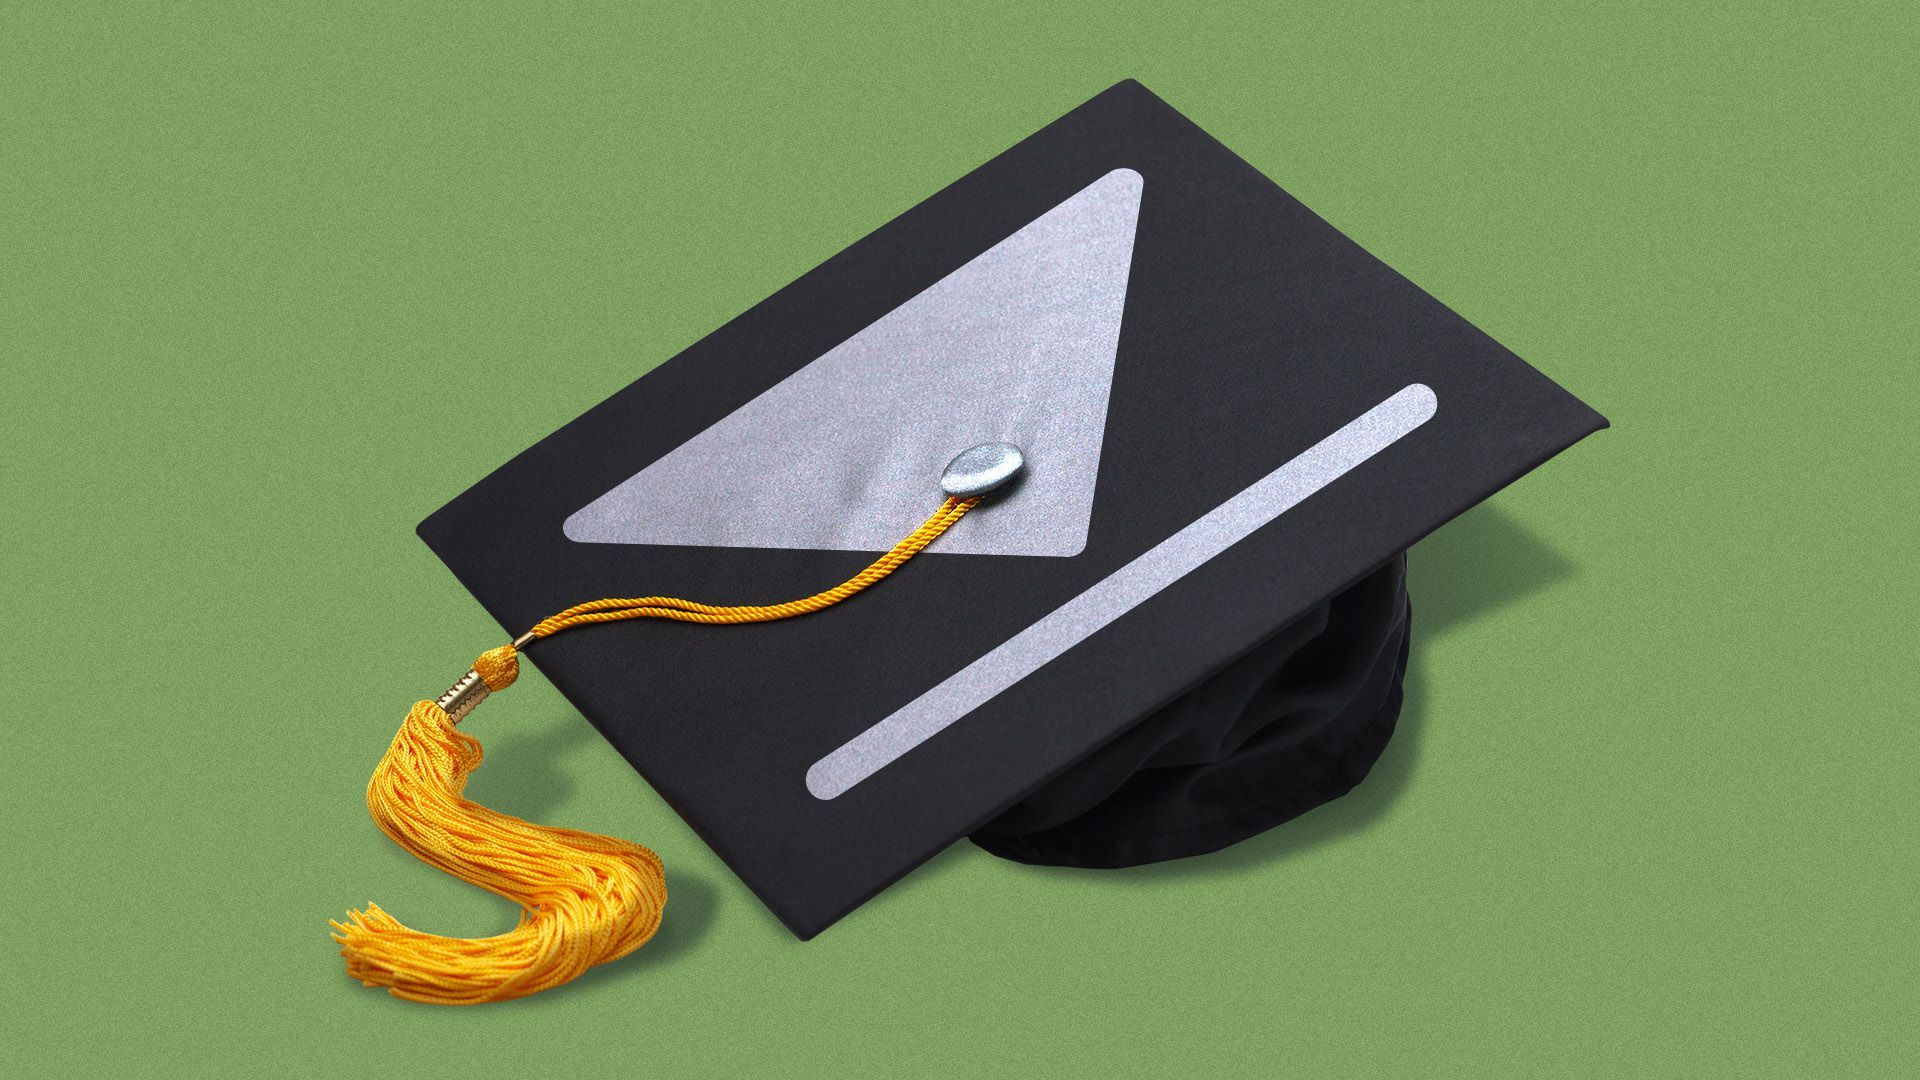 Illustration of a graduation mortarboard with a "skip" symbol on it